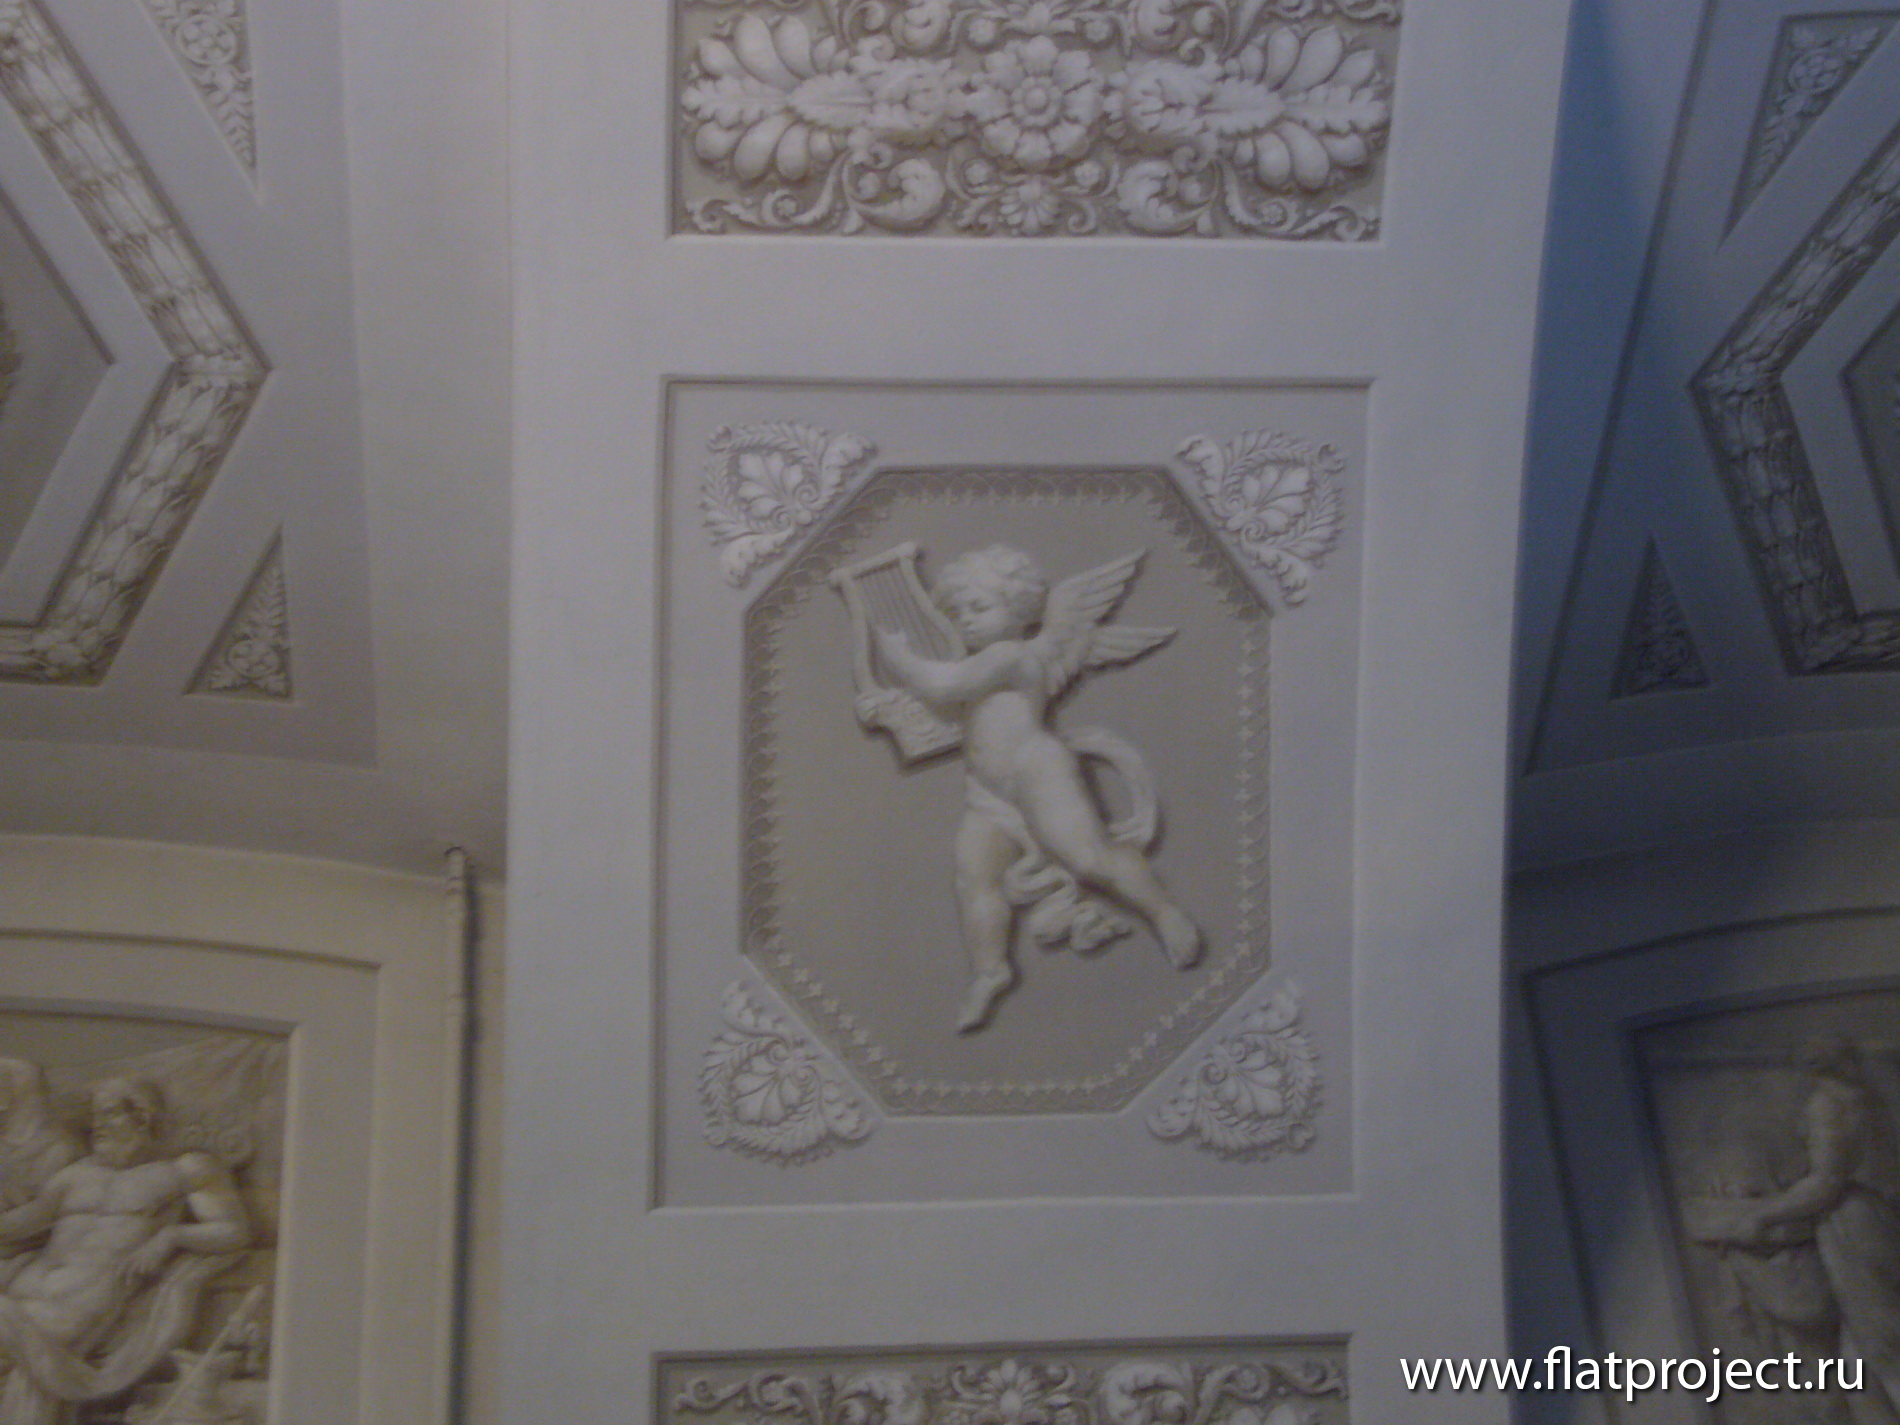 The State Russian museum interiors – photo 133